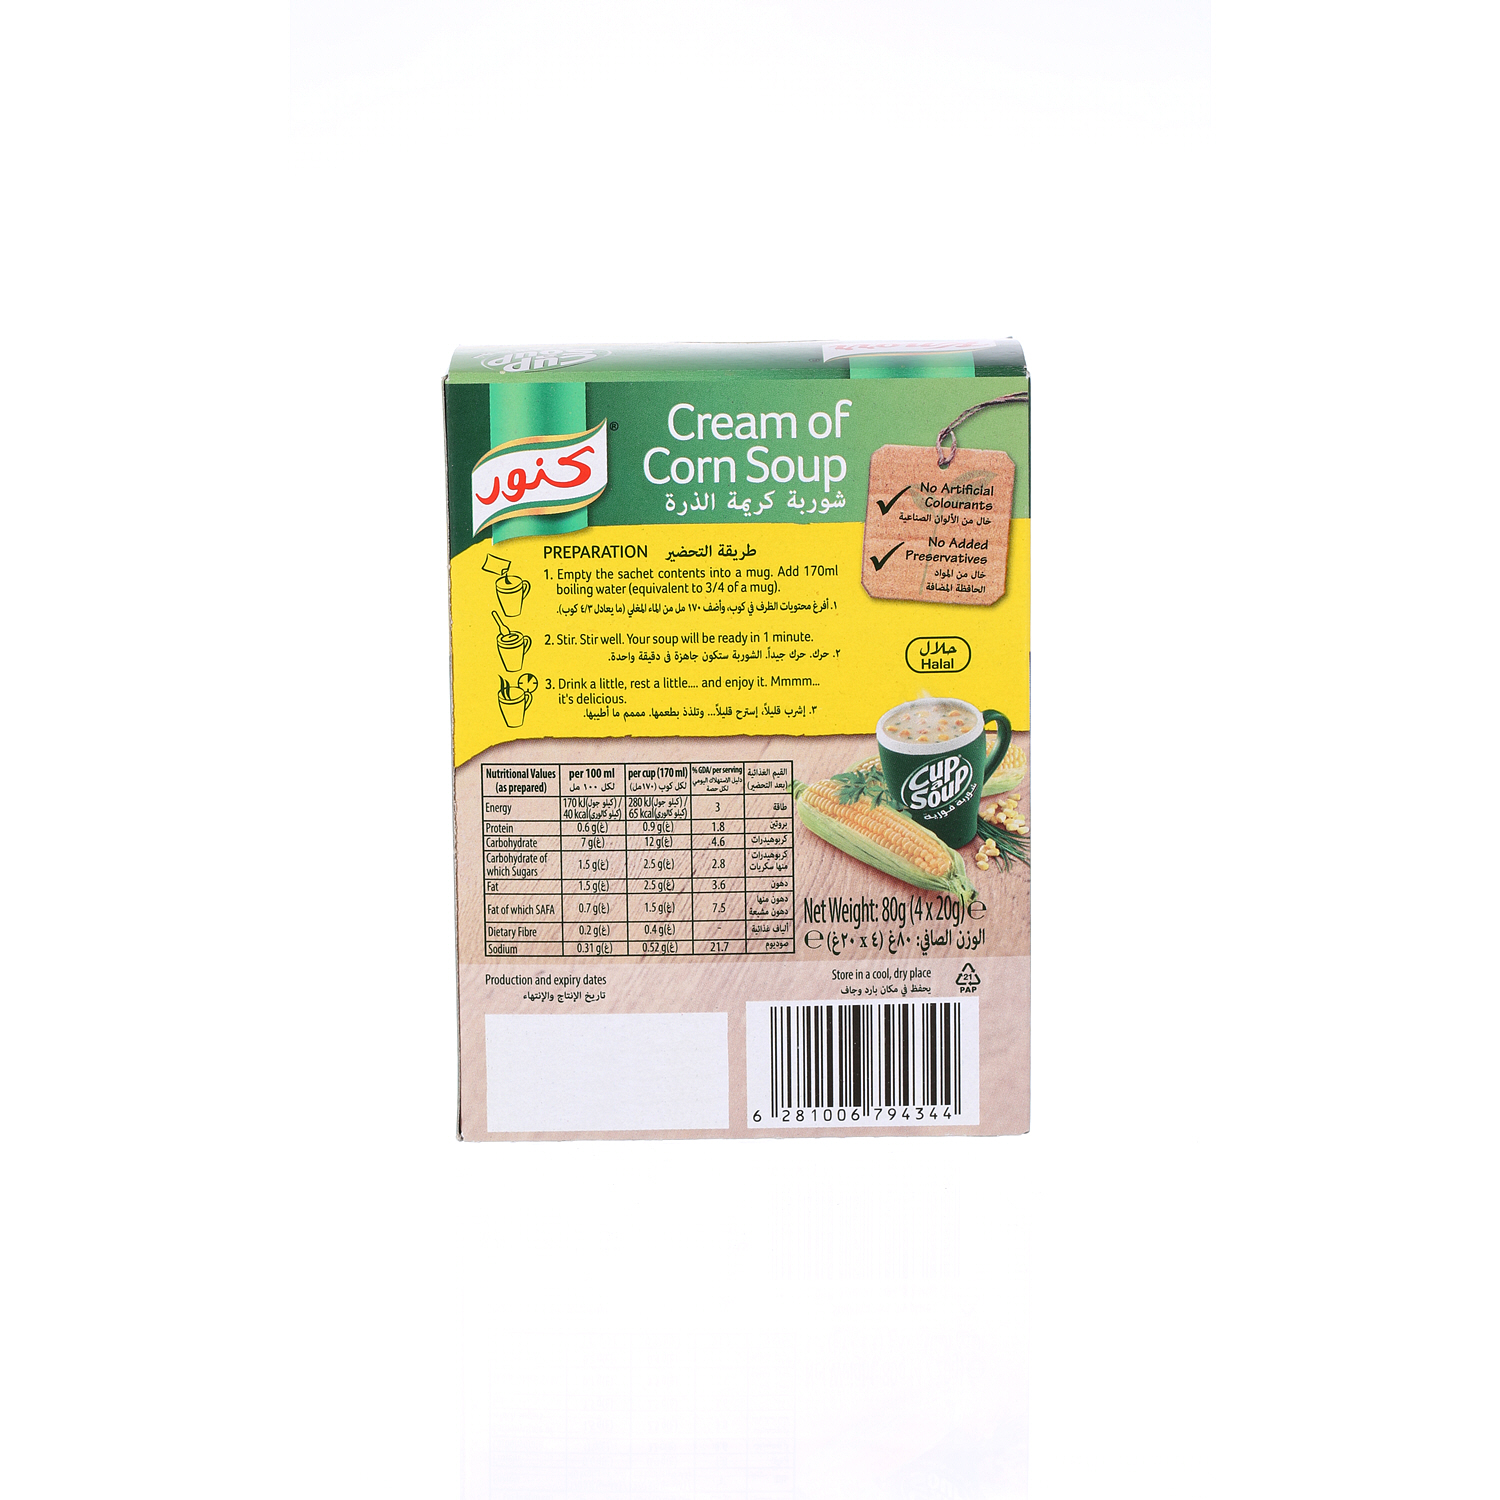 Knorr Soup Cream of Corn 20 g × 4 Pack